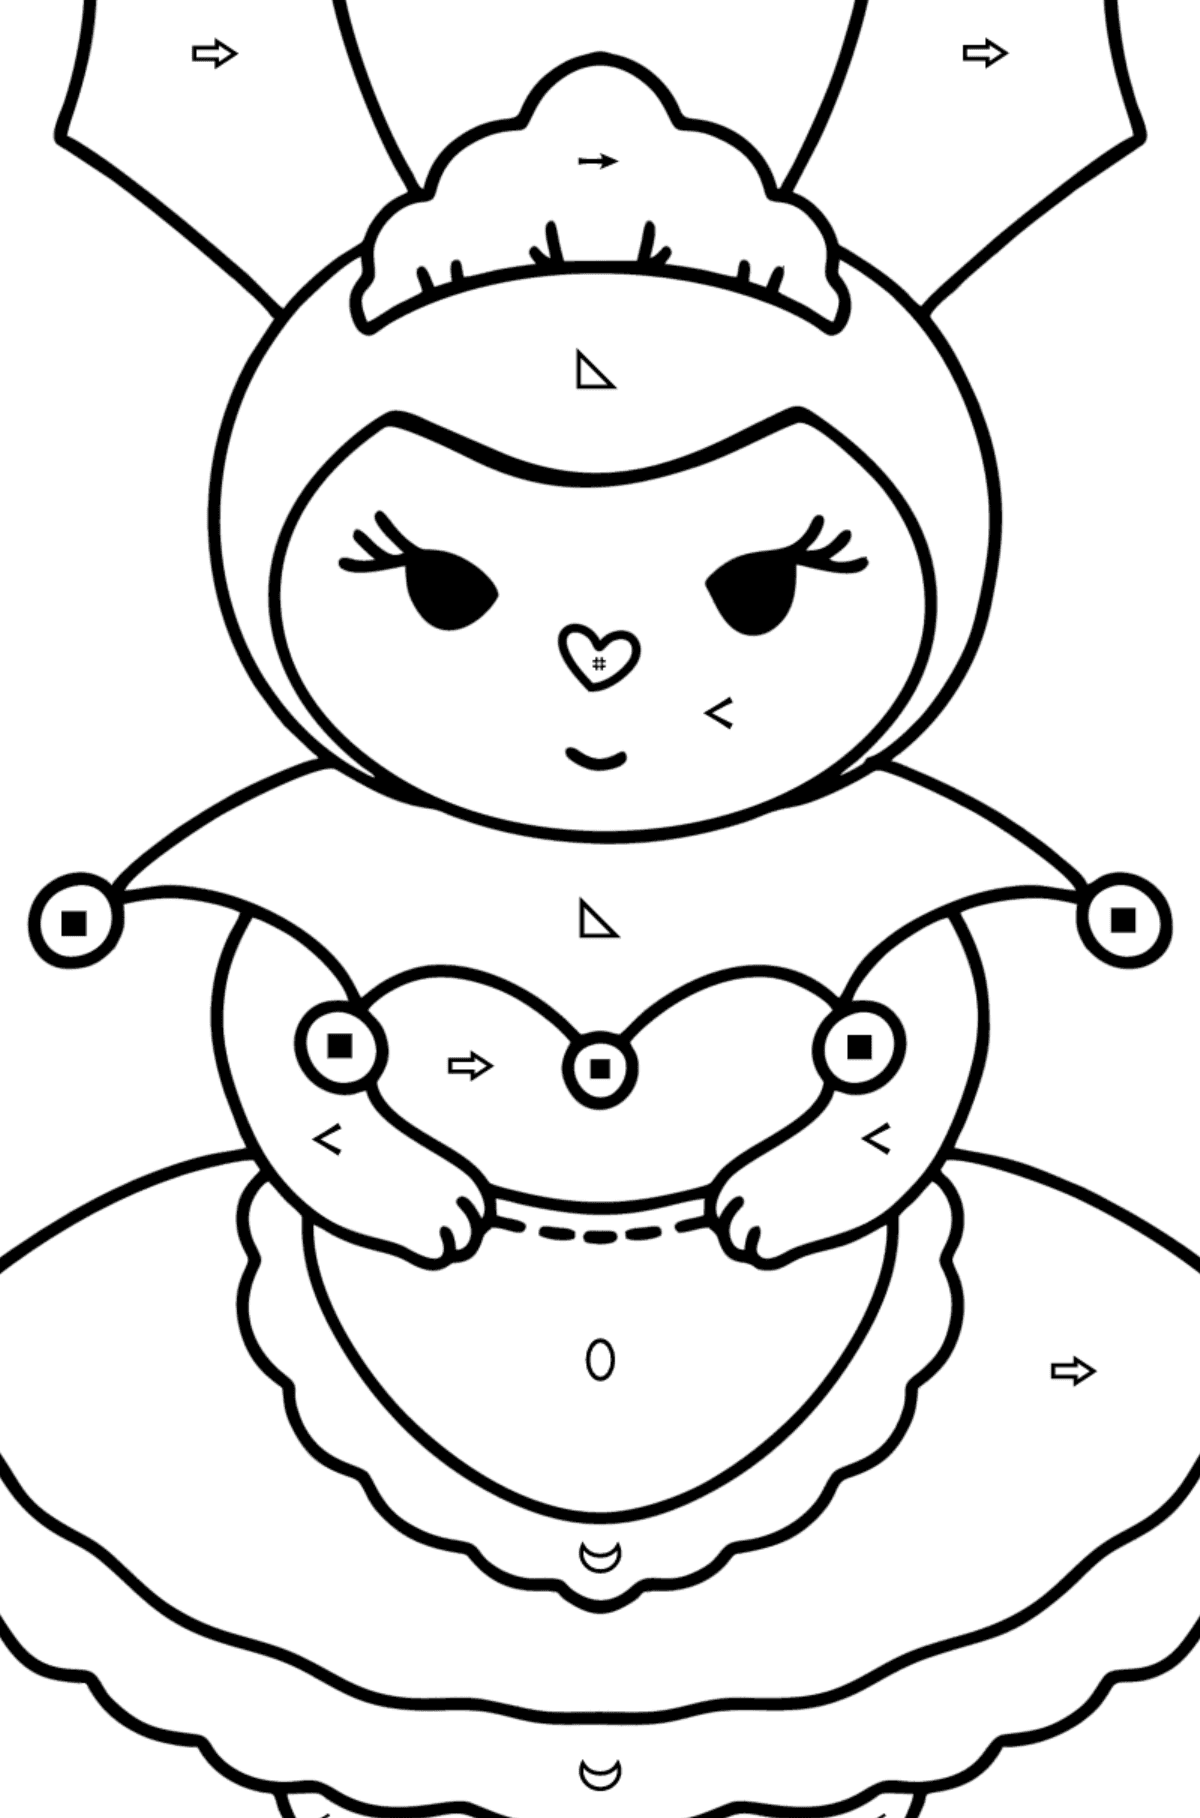 Hello Kitty Kuromy coloring page - Coloring by Symbols and Geometric Shapes for Kids